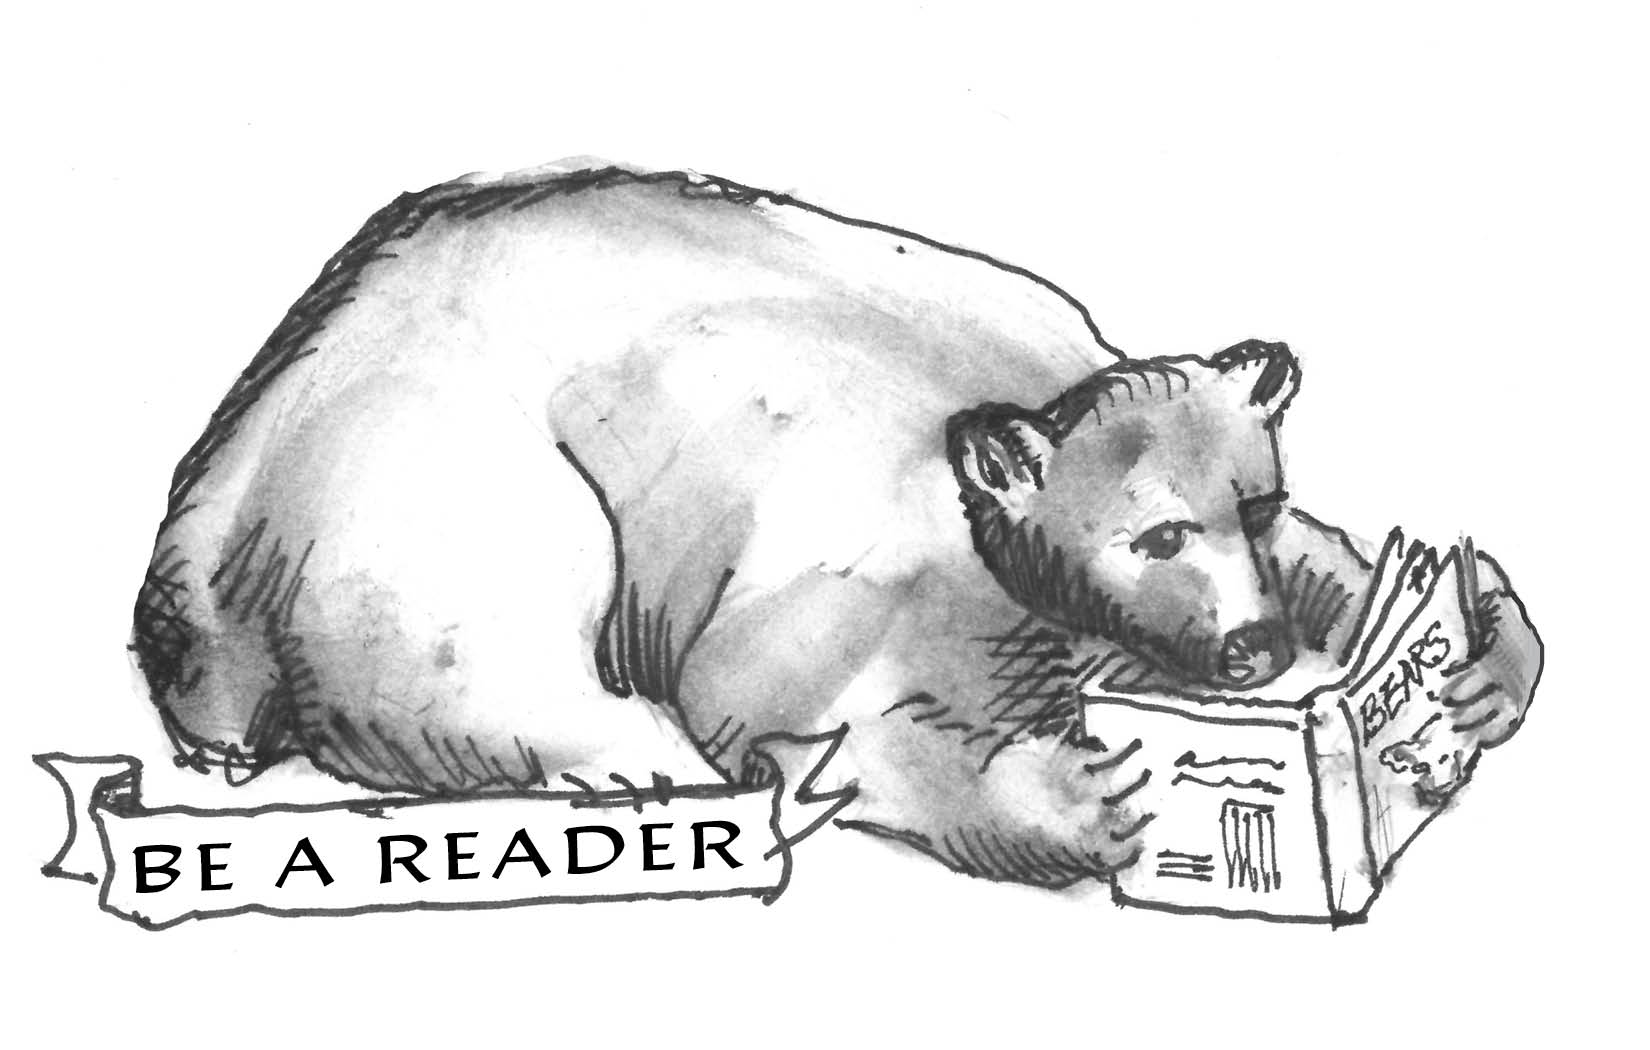 drawing of a bear reading by Peggy Johnson